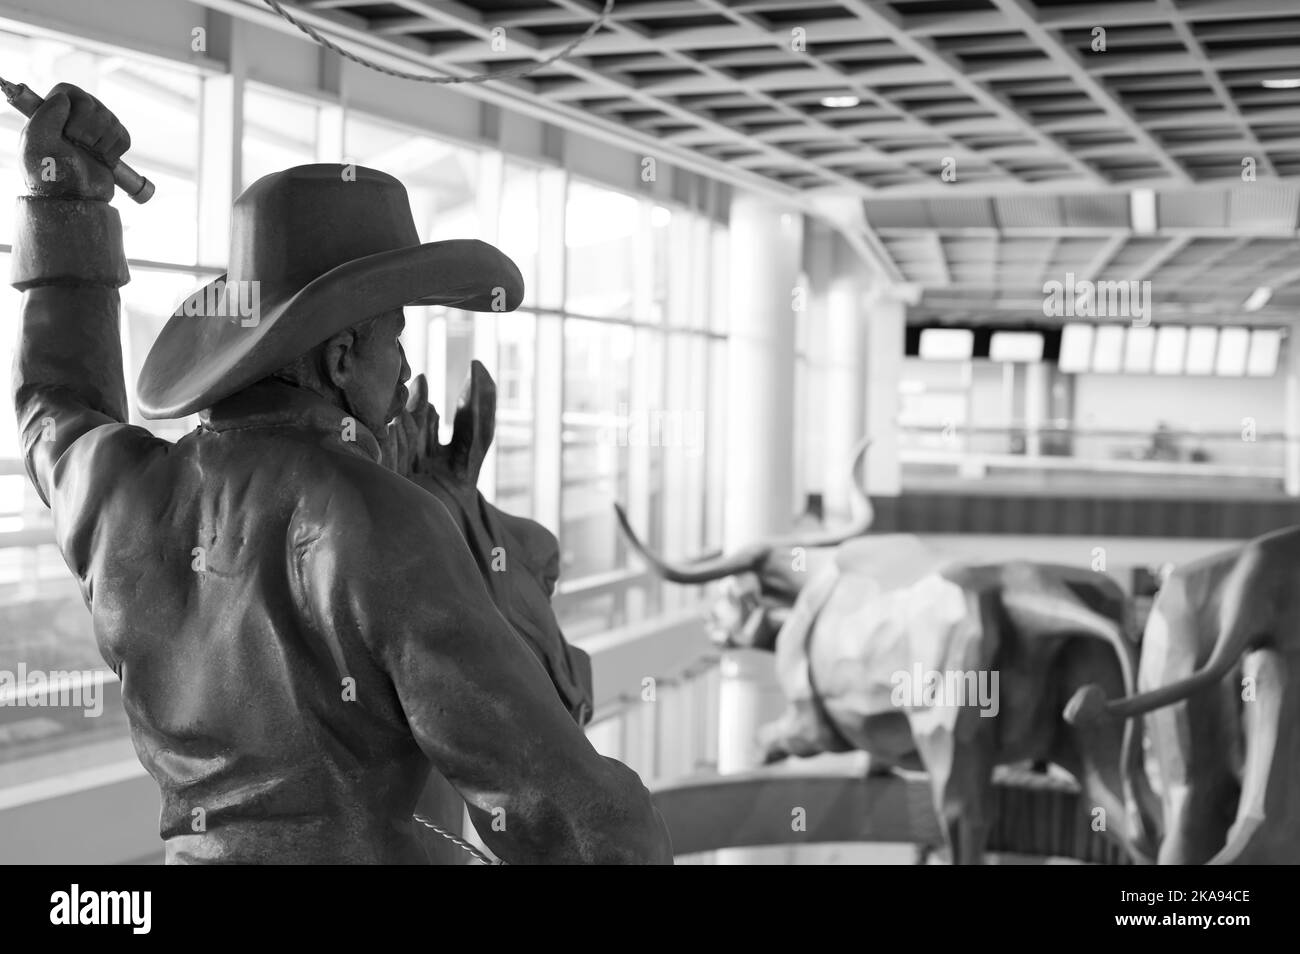 Dallas, Texas, US - 10.2022 - Statue of a cowboy running cattle in the DFW airport rental car facility Stock Photo